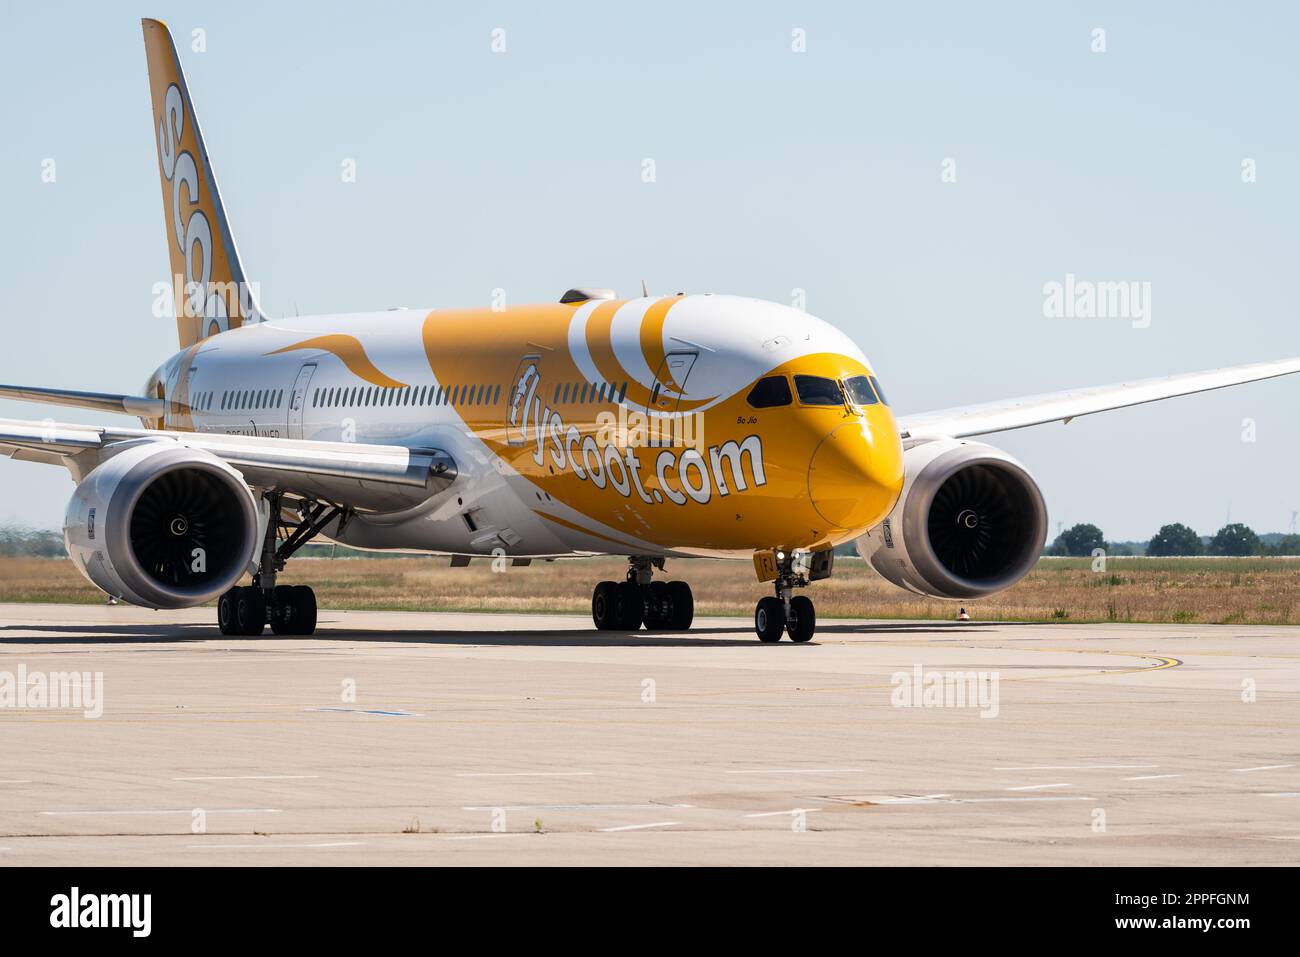 BERLIN, GERMANY - JUNE 23, 2022: Wide-body jet airliner Boeing 787-8 Dreamliner of Scoot airline. Stock Photo